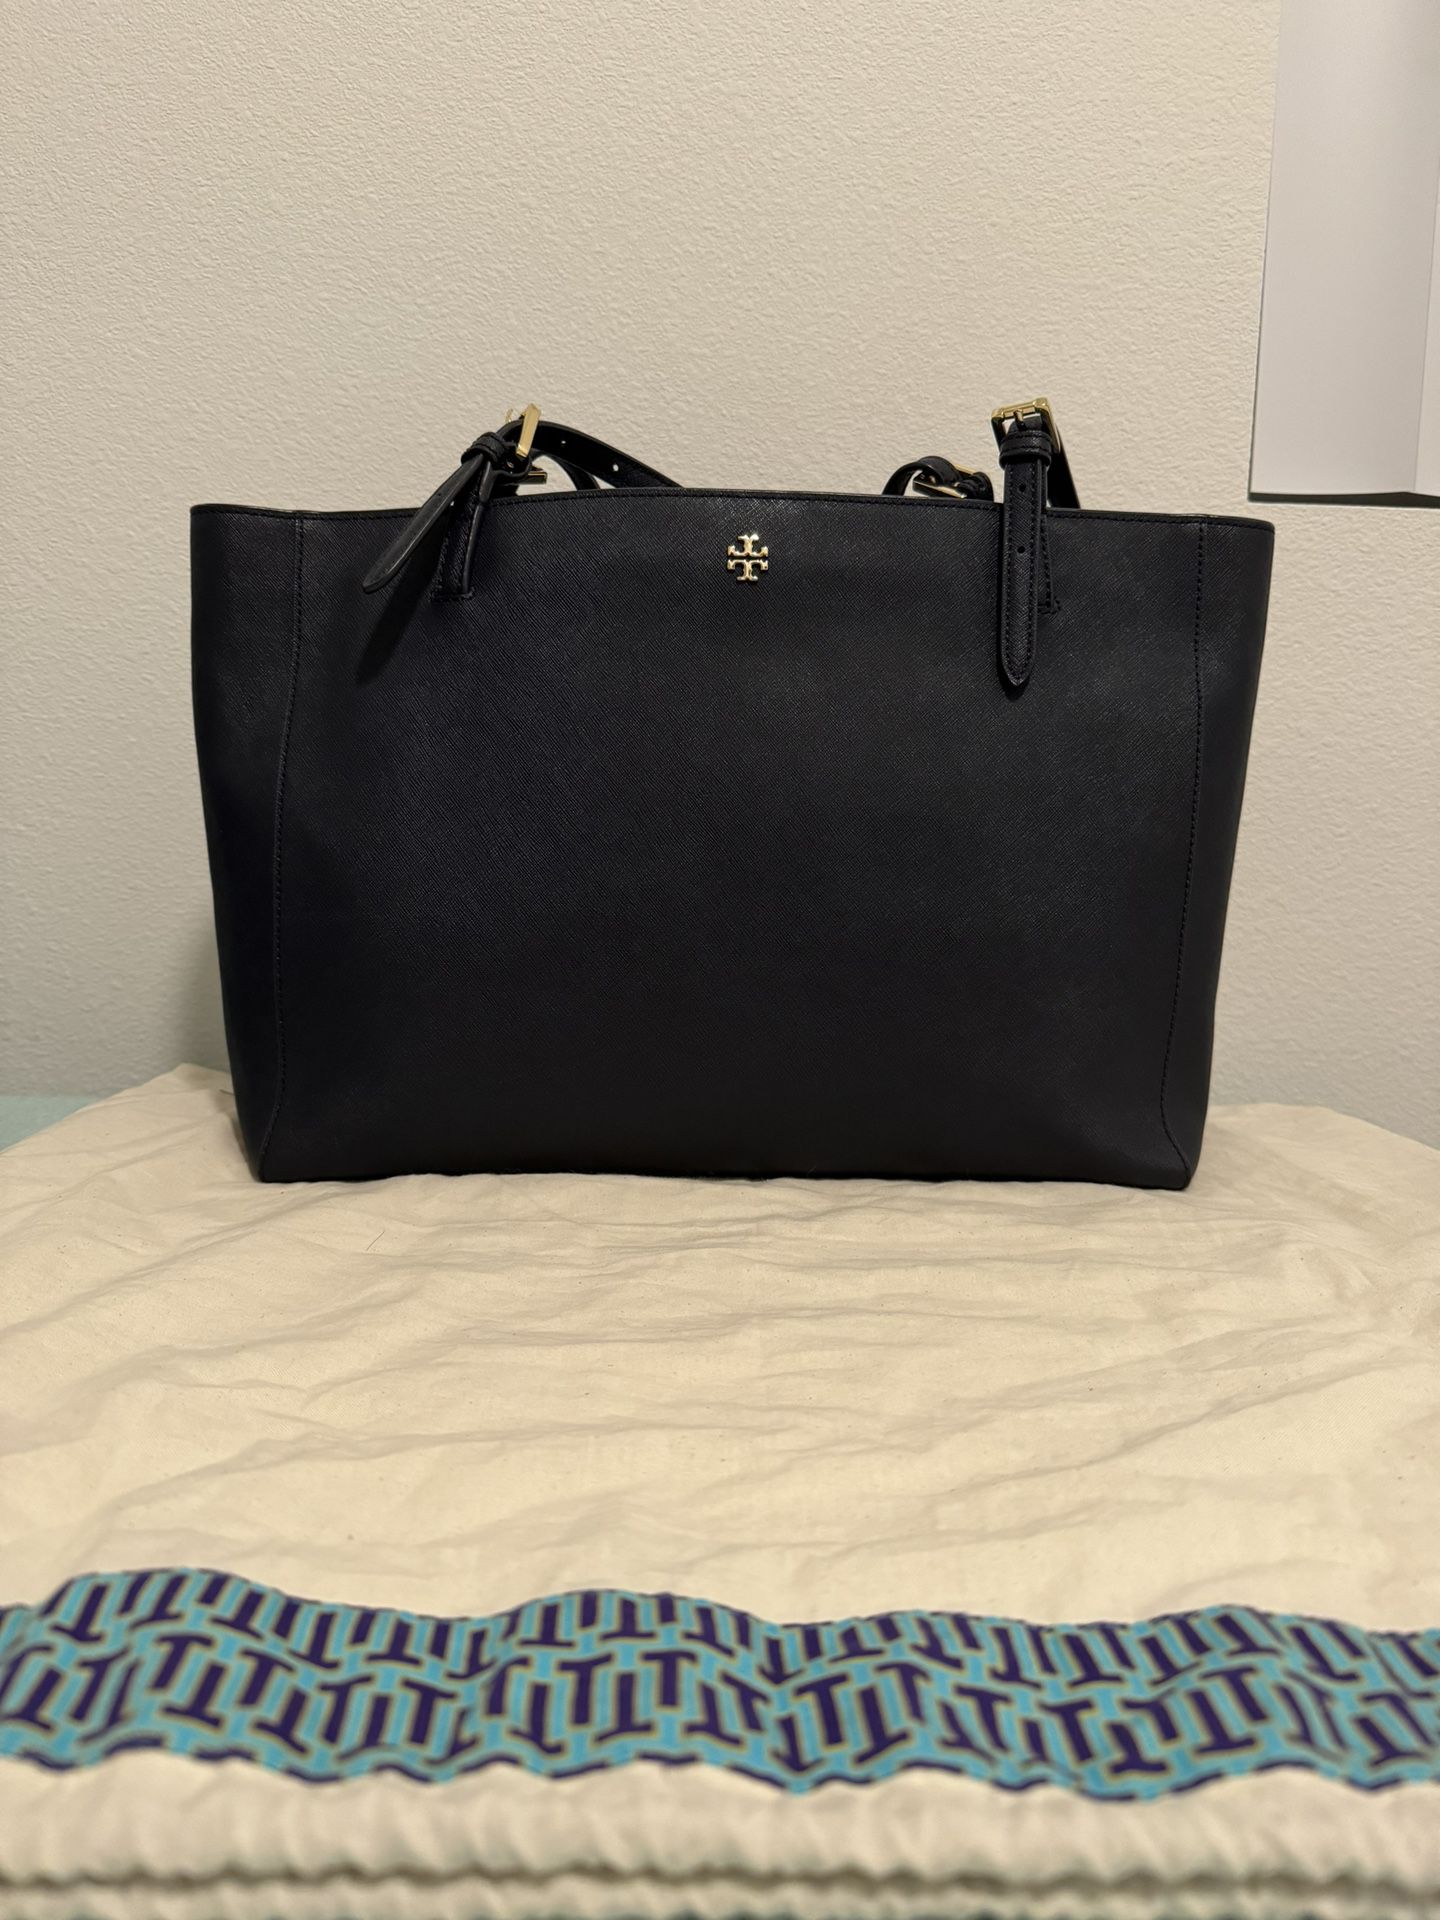 Tory Burch Tote With Dust Bag 